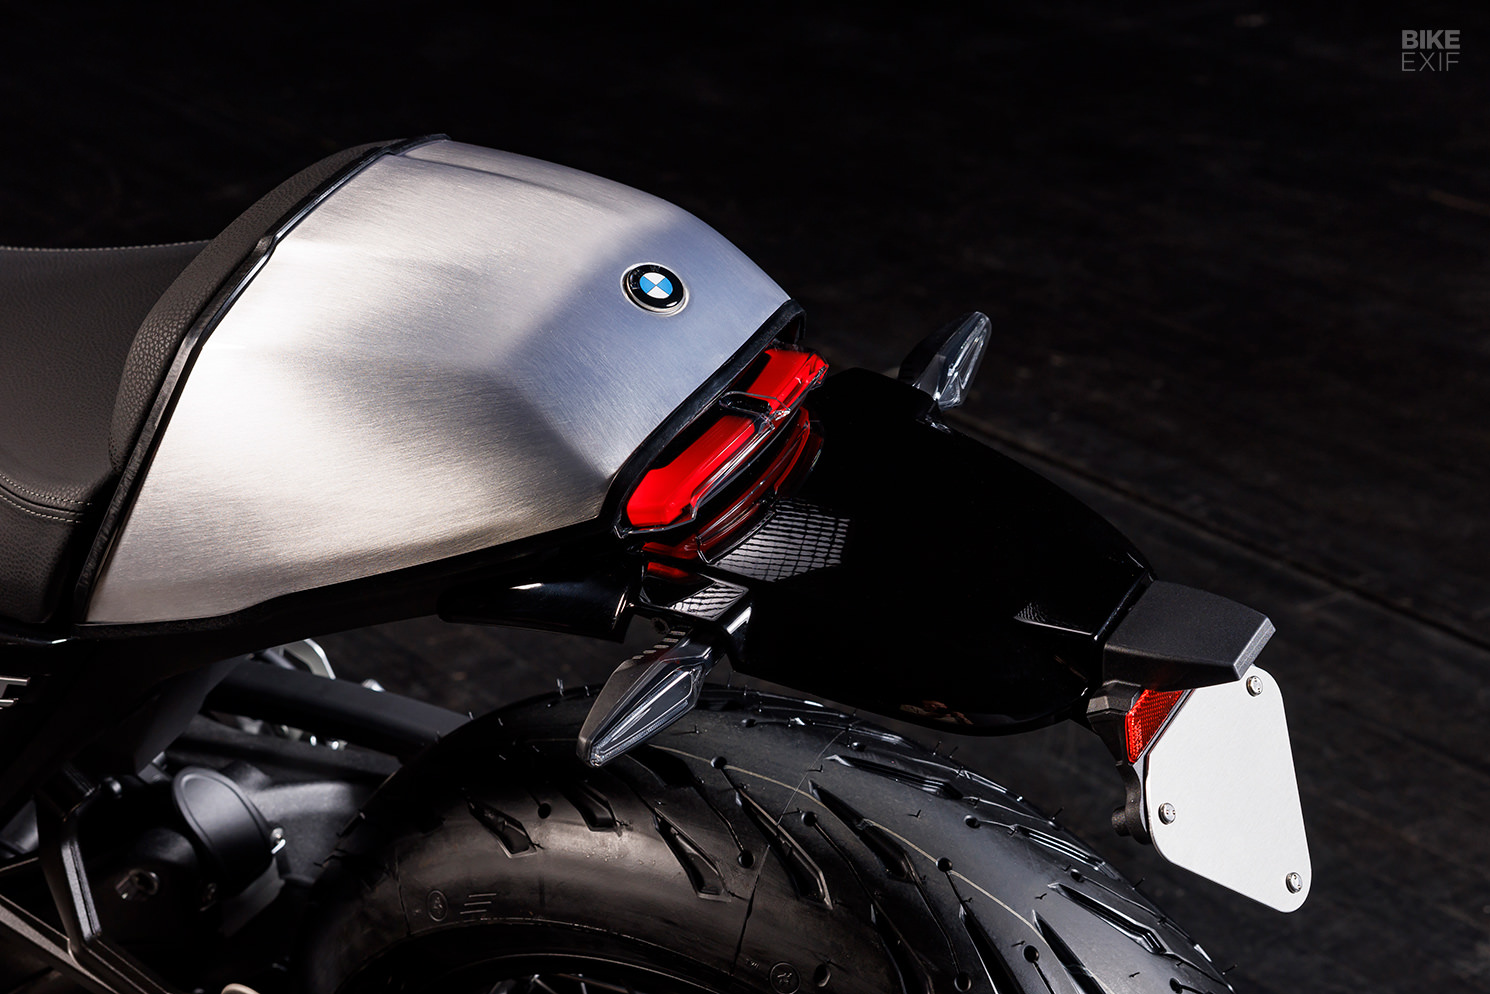 The new BMW R 12 nineT roadster